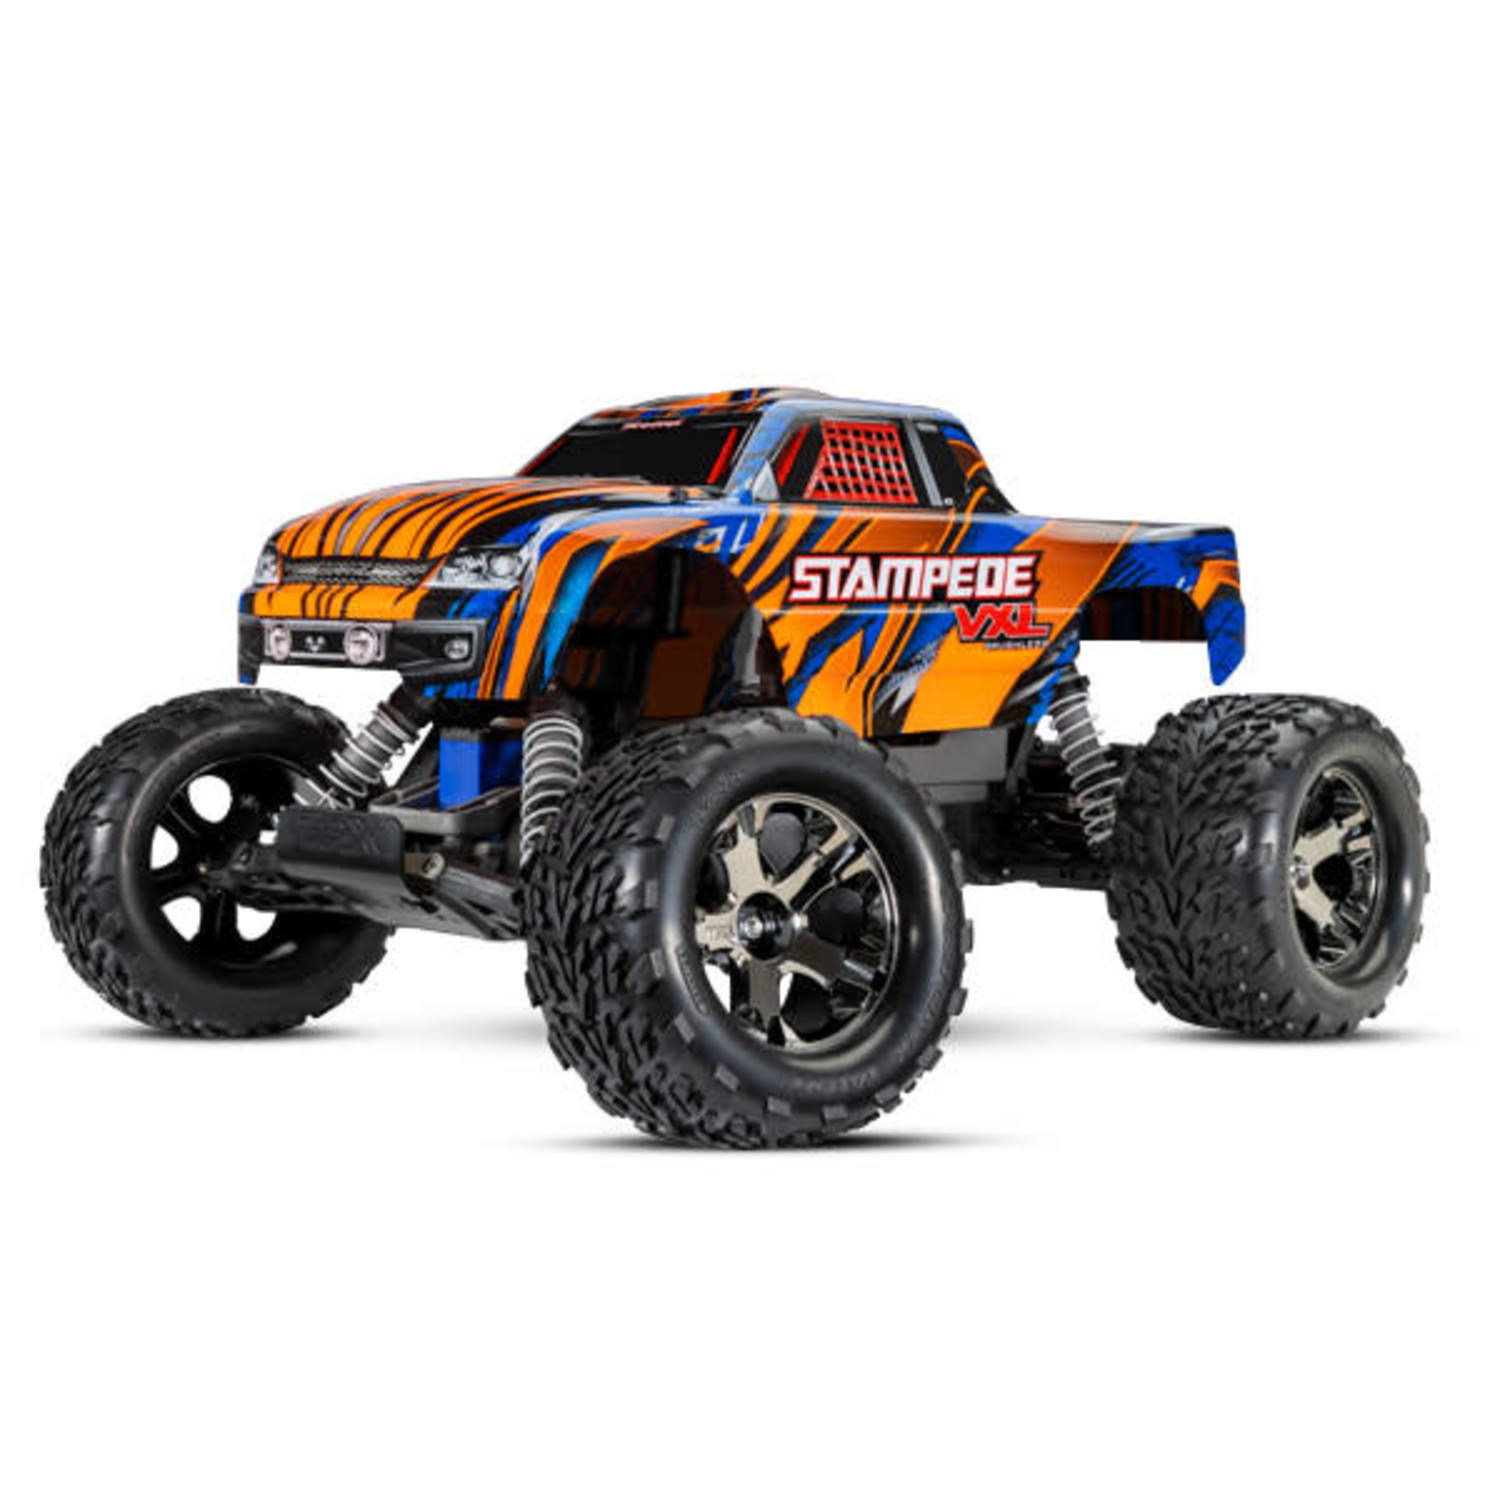 Traxxas Stampede VXL 1/10 Scale 2WD Brushless Monster Truck w/ Magnum 272R - Orange